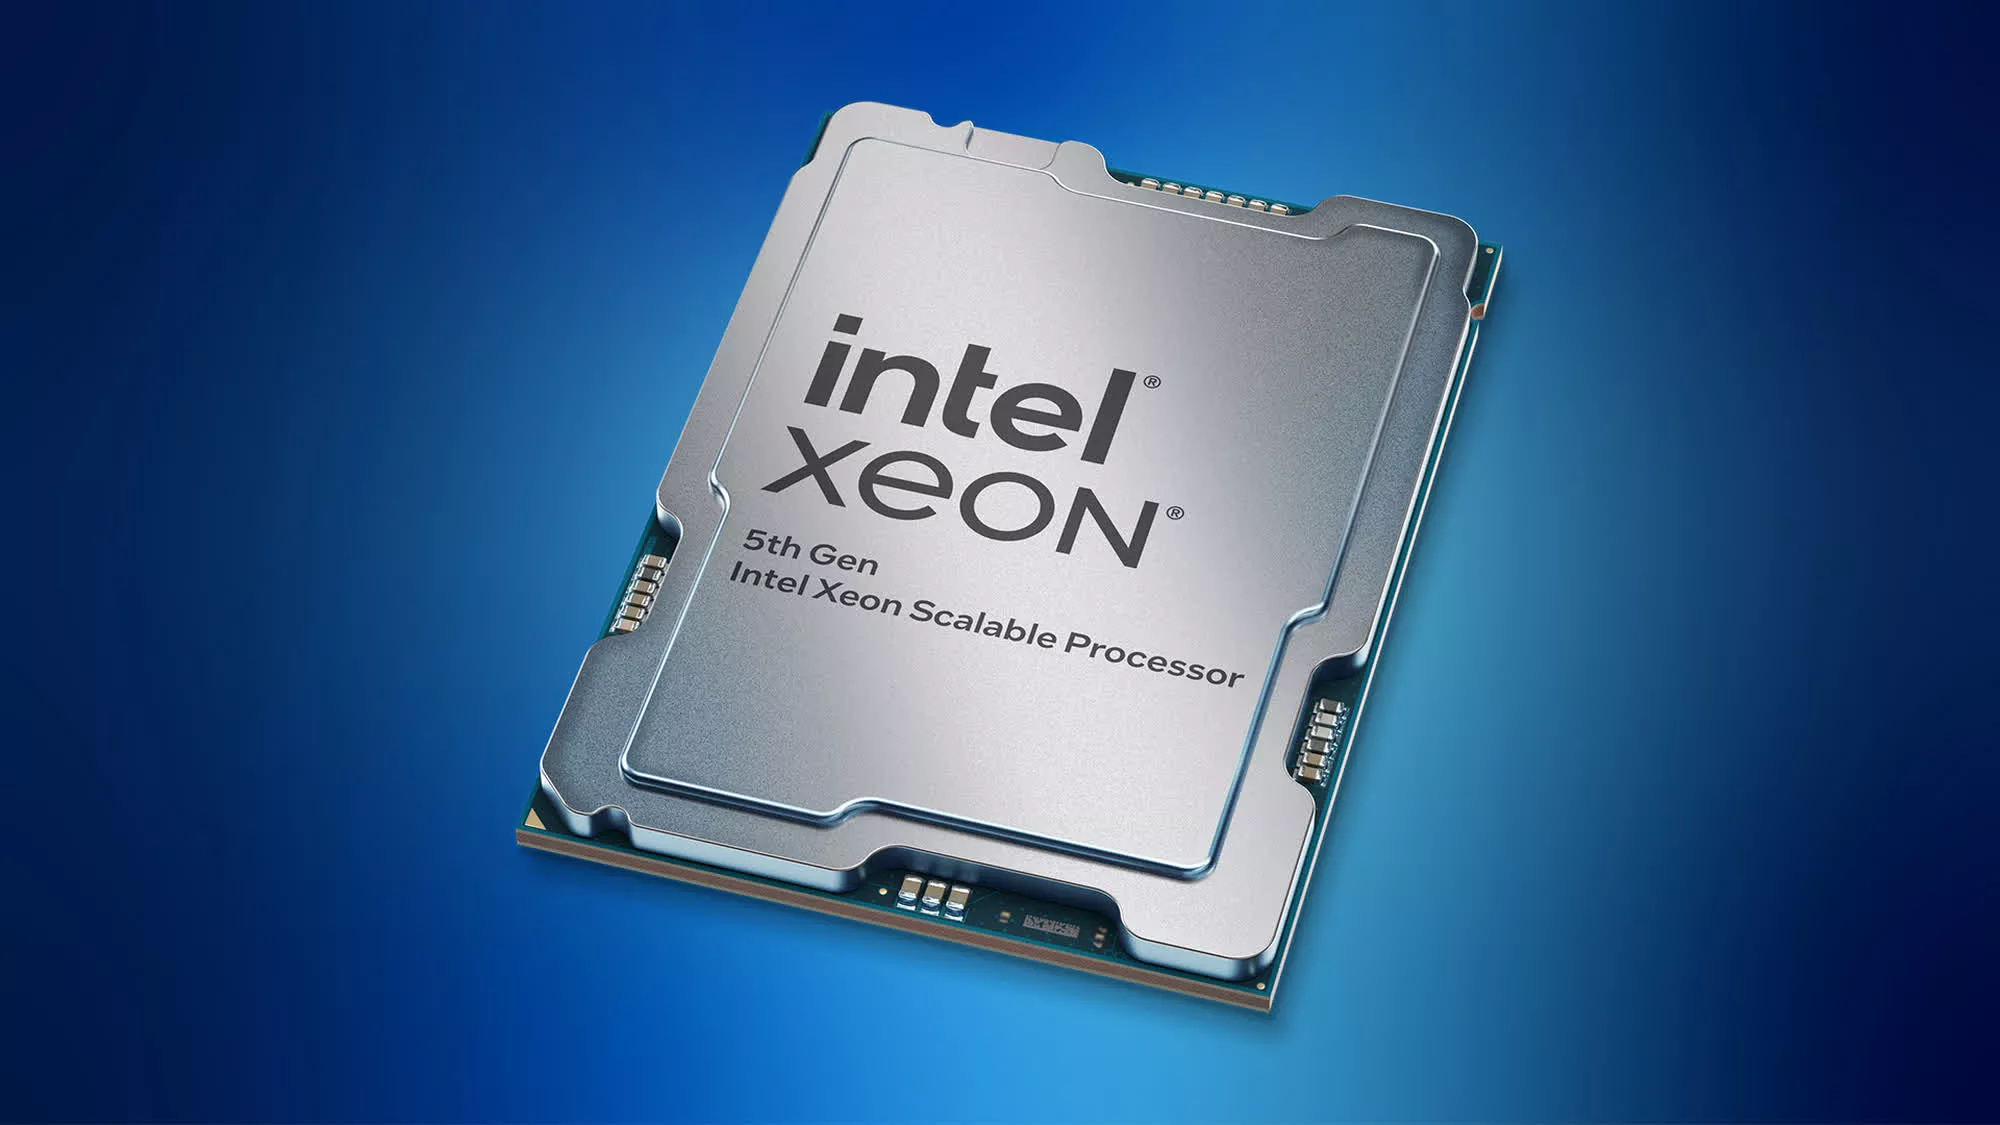 intel-refutes-amd’s-claims,-says-its-5th-gen-xeon-is-faster-than-epyc-turin-in-ai-workloads-[techspot]